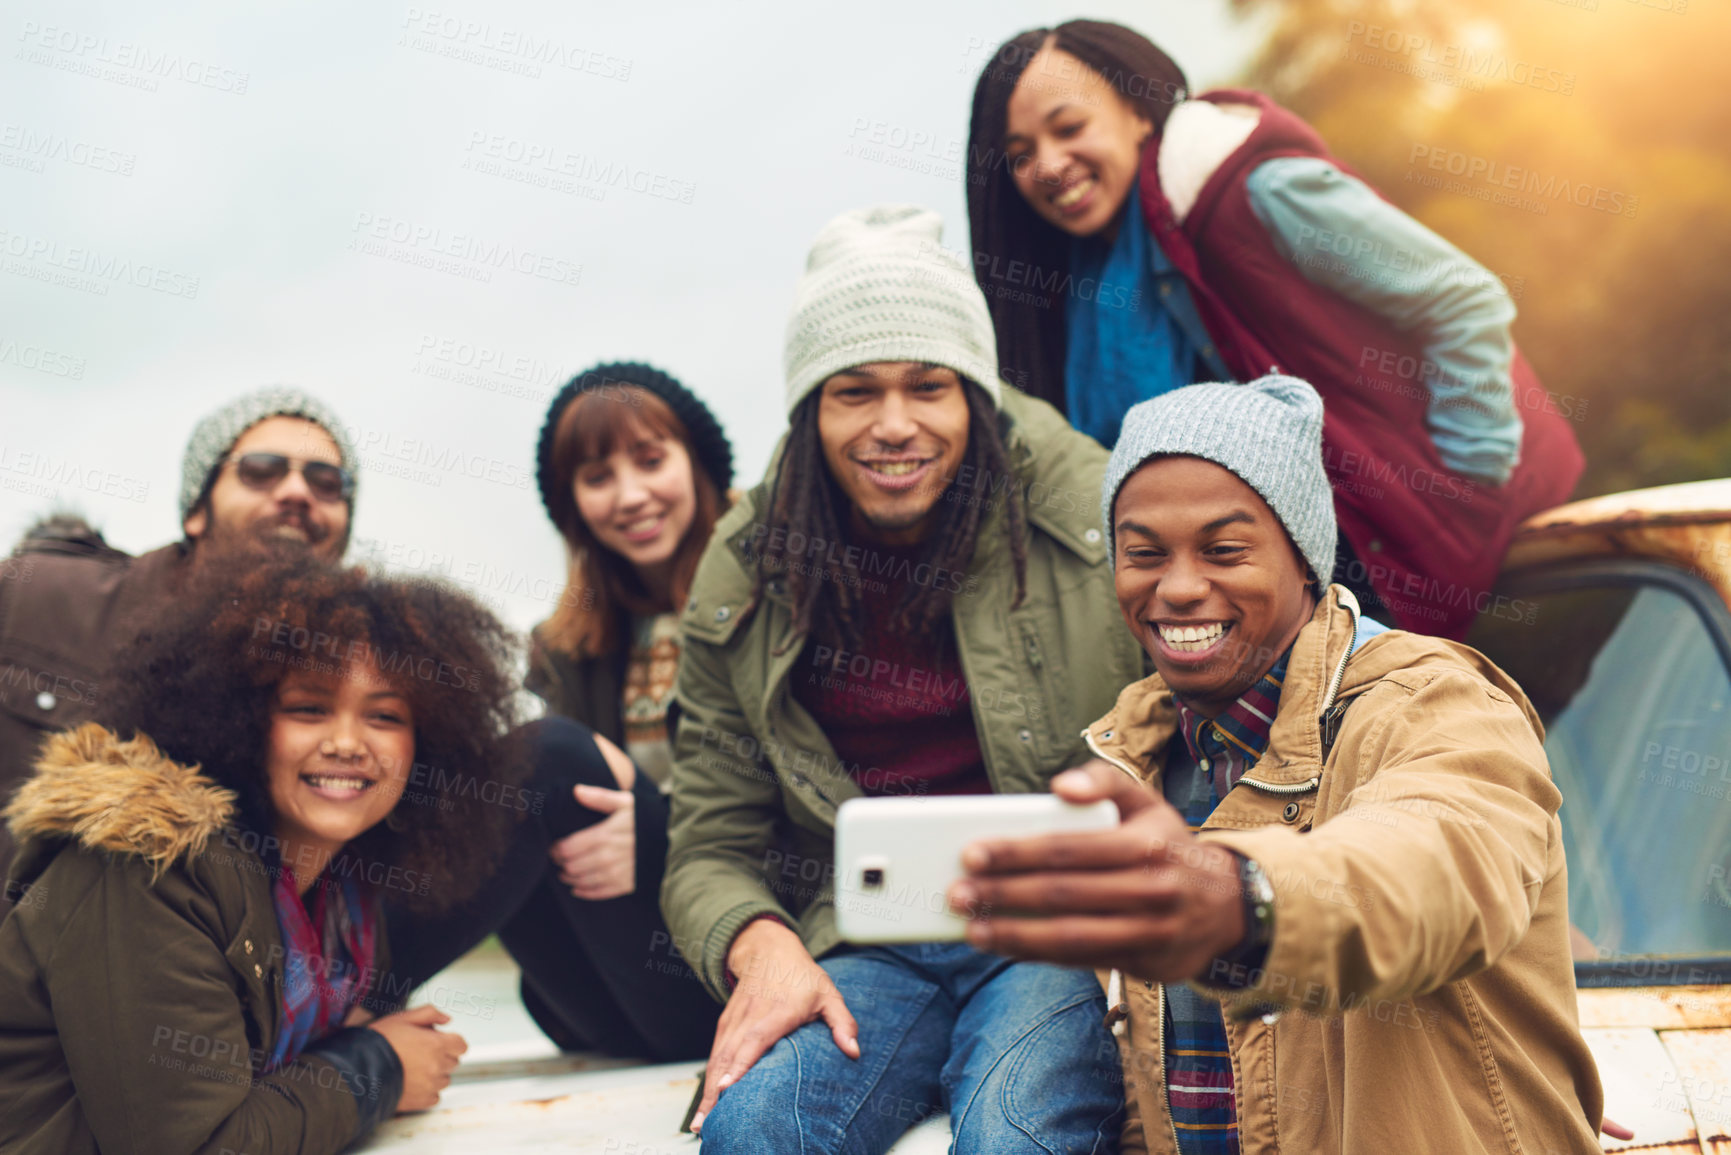 Buy stock photo Shot of a group of friends posing for a selfie while having fun outside